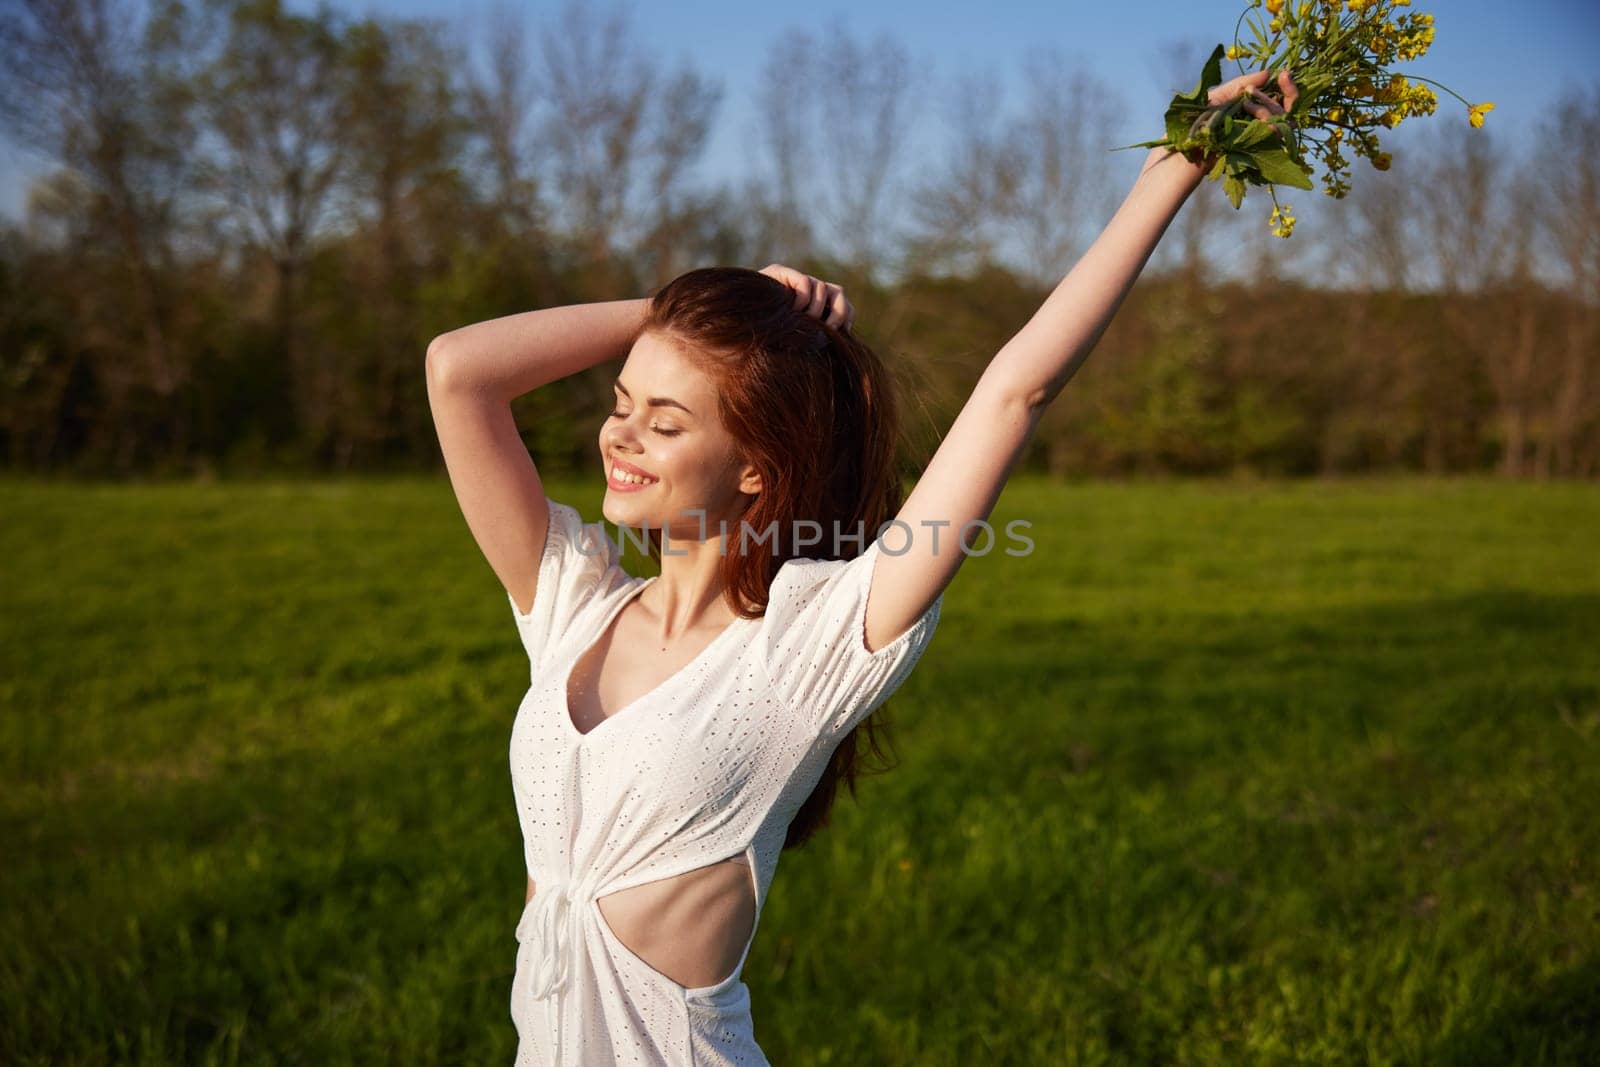 a beautiful, happy woman in a light dress stands in a field raising her hands high holding a bouquet of flowers by Vichizh